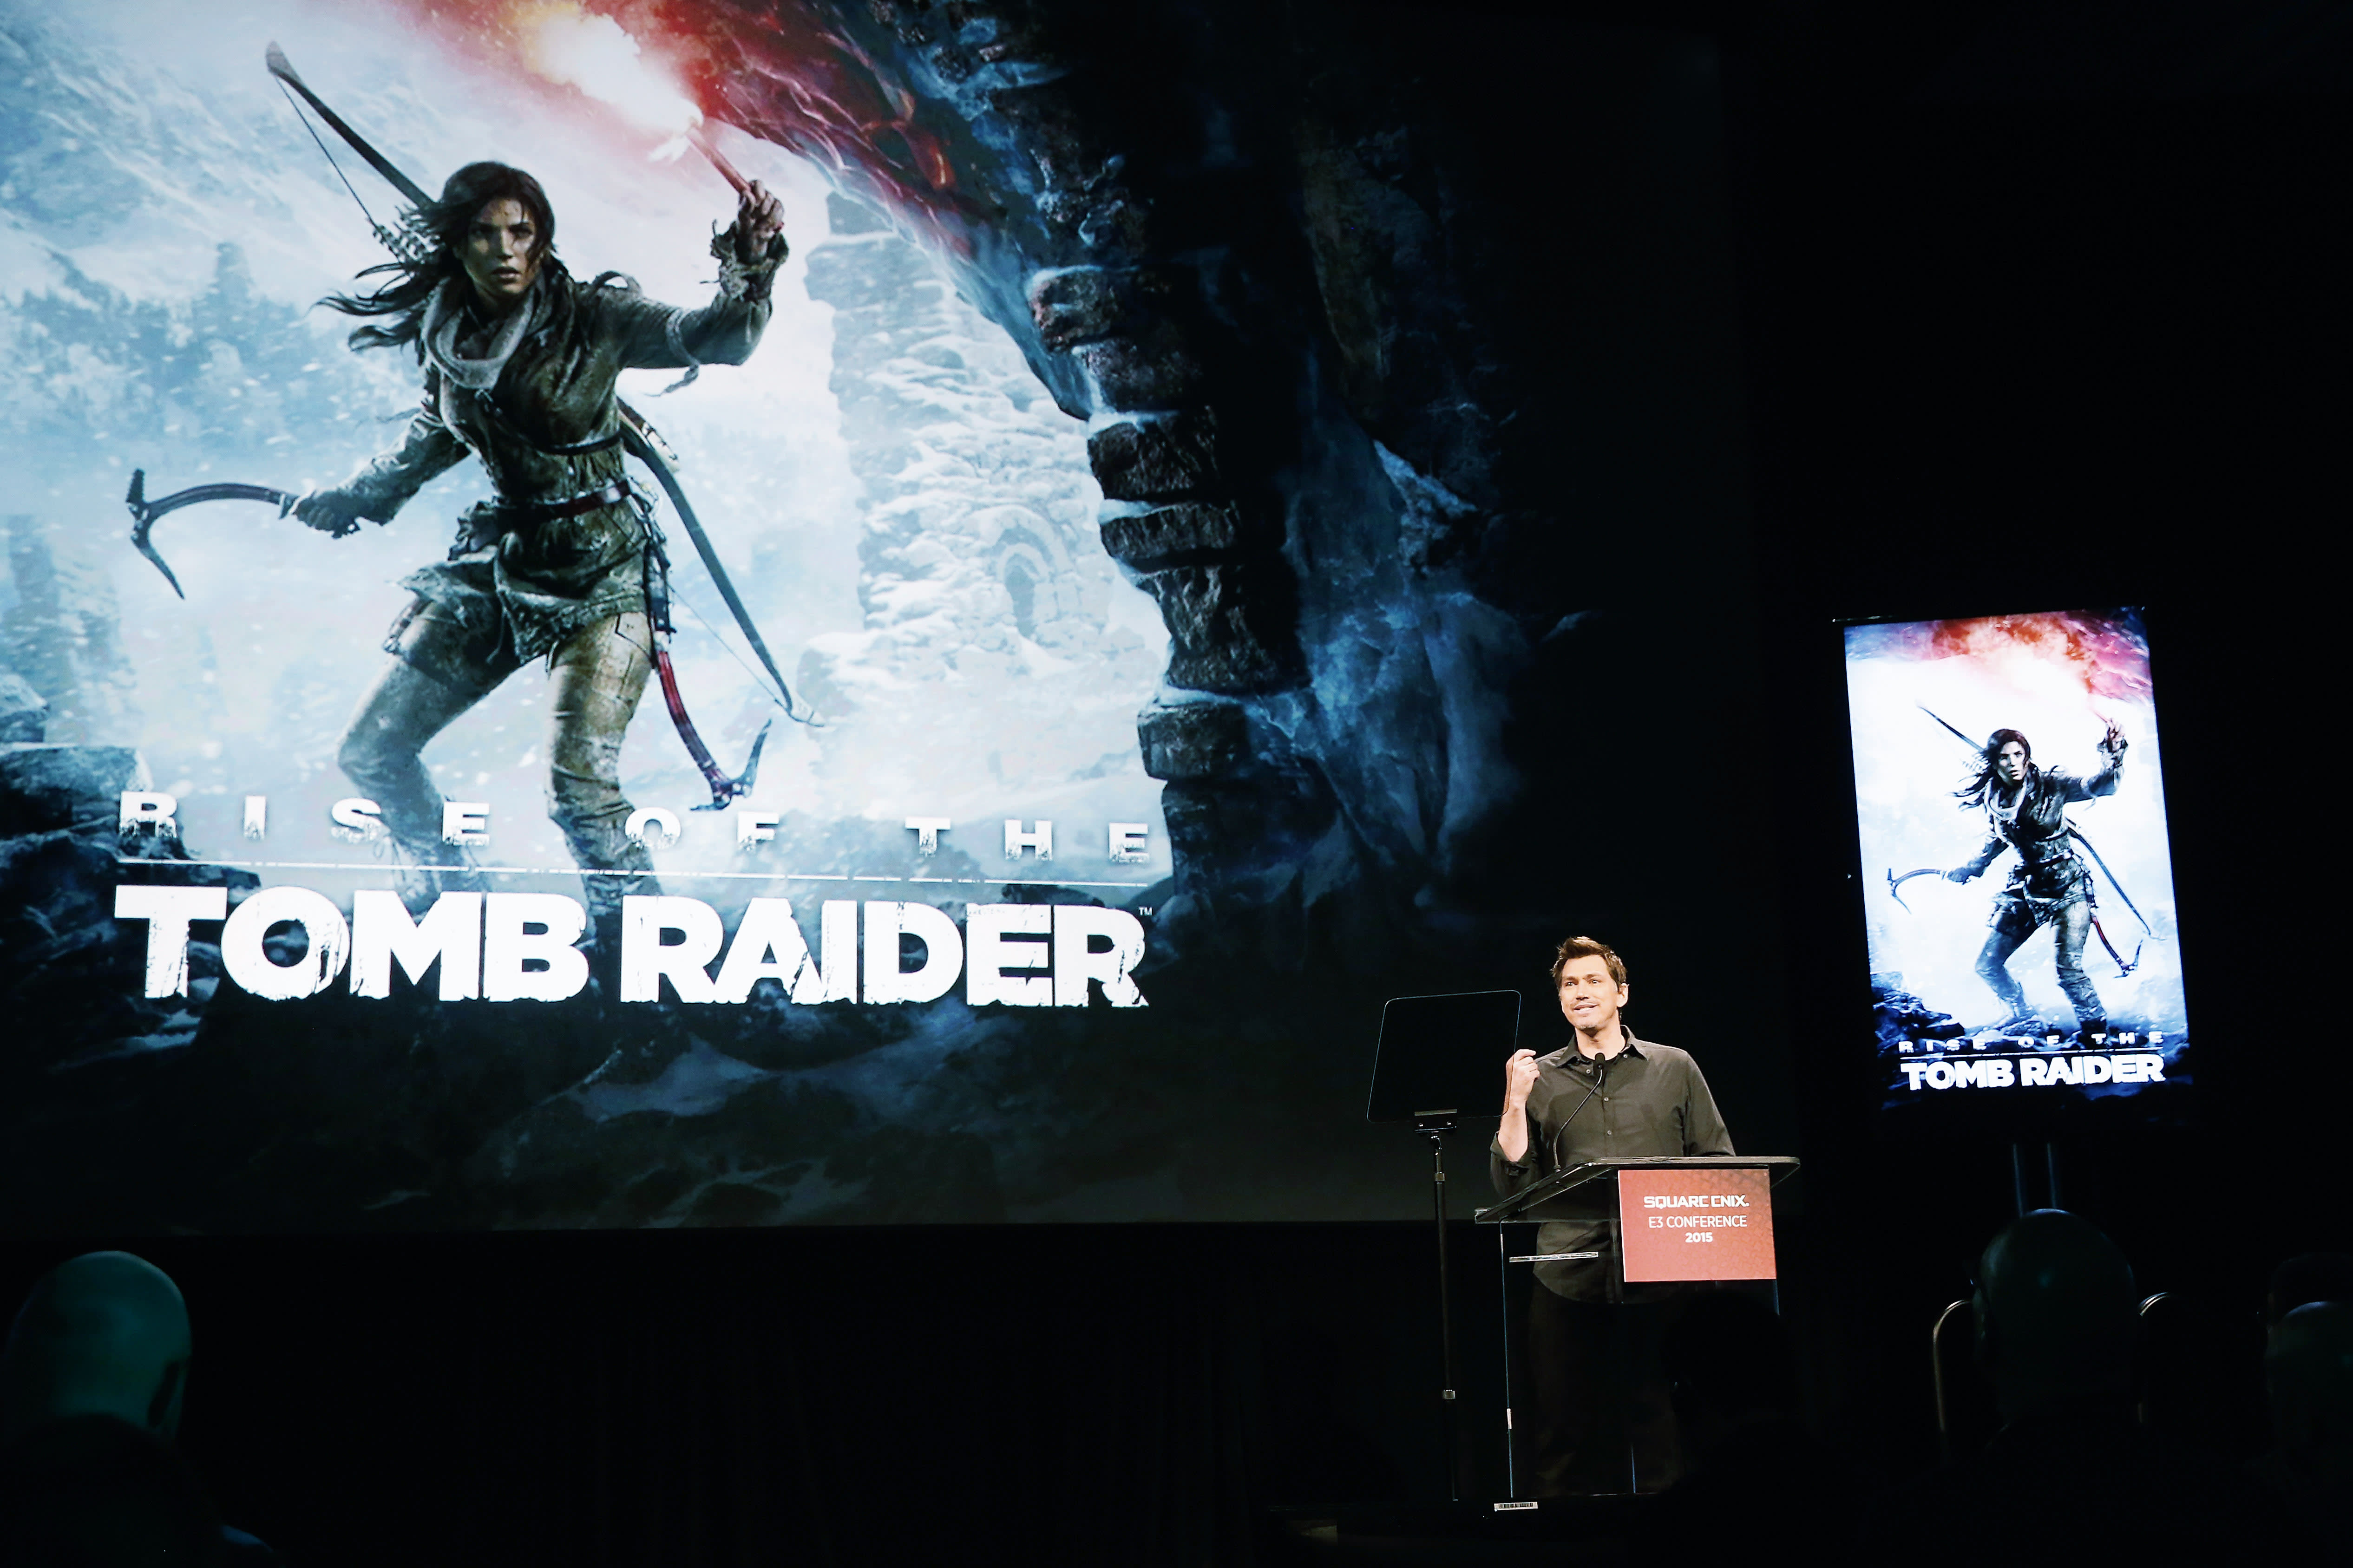 Tomb Raider publisher Square Enix to sell iconic video game franchise, square  enix 